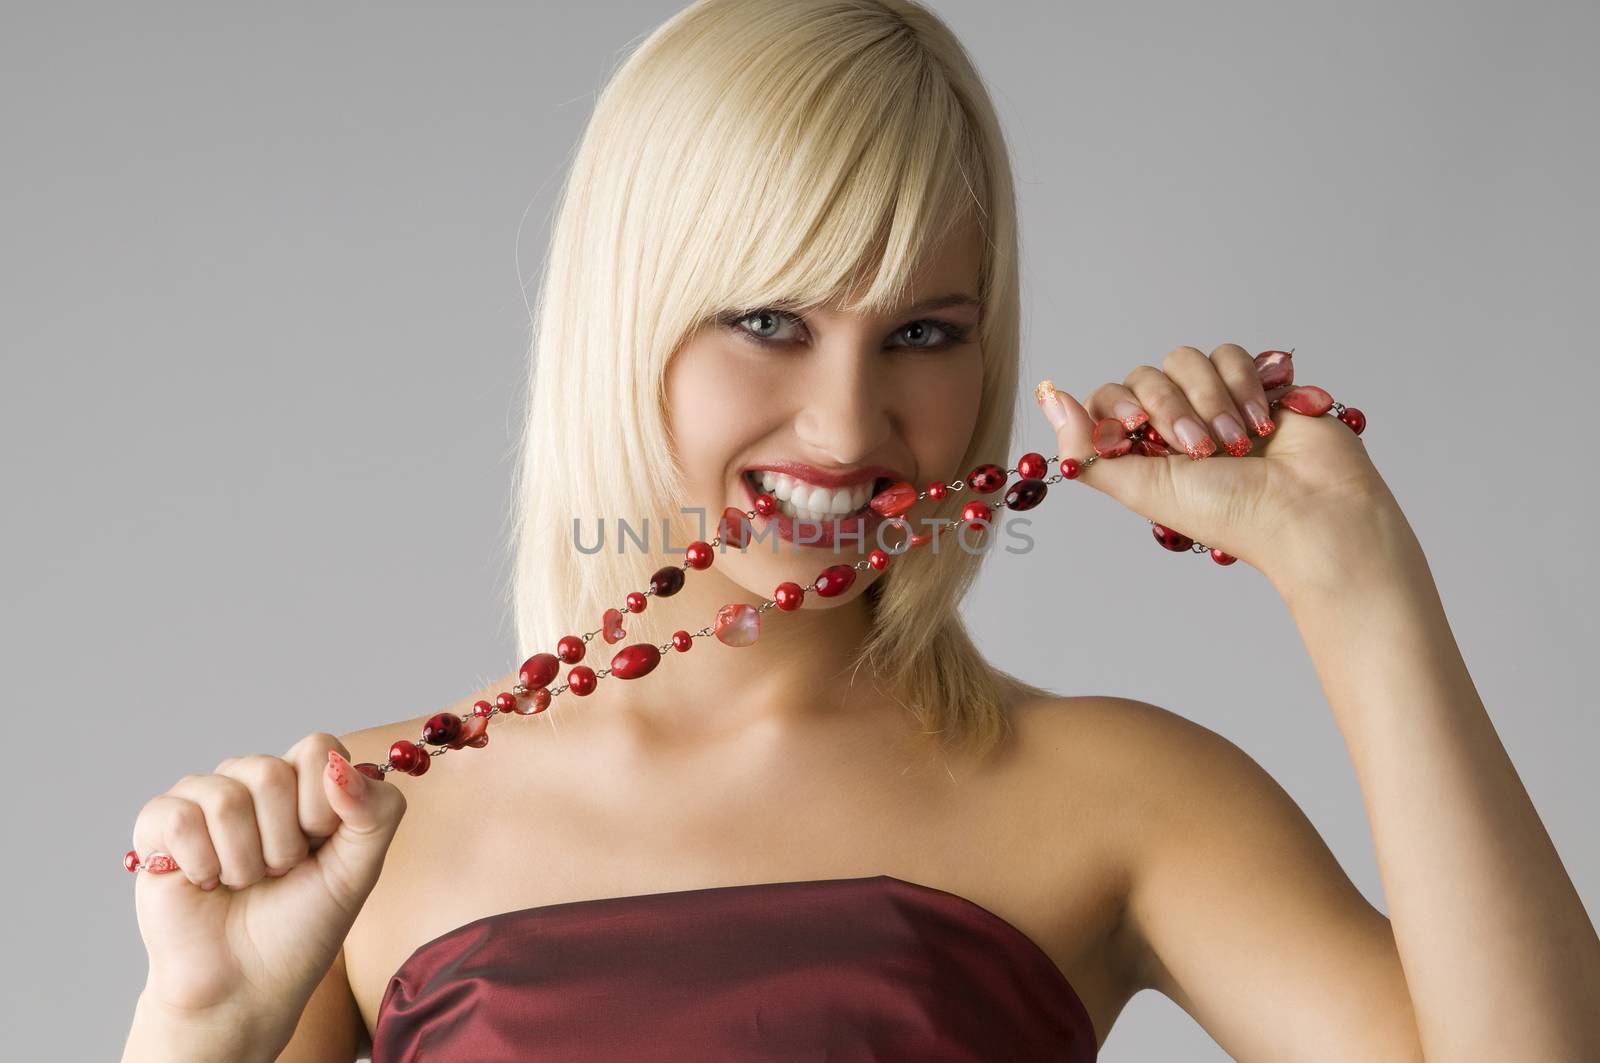 cute blond girl with glamor make up biting a red necklace